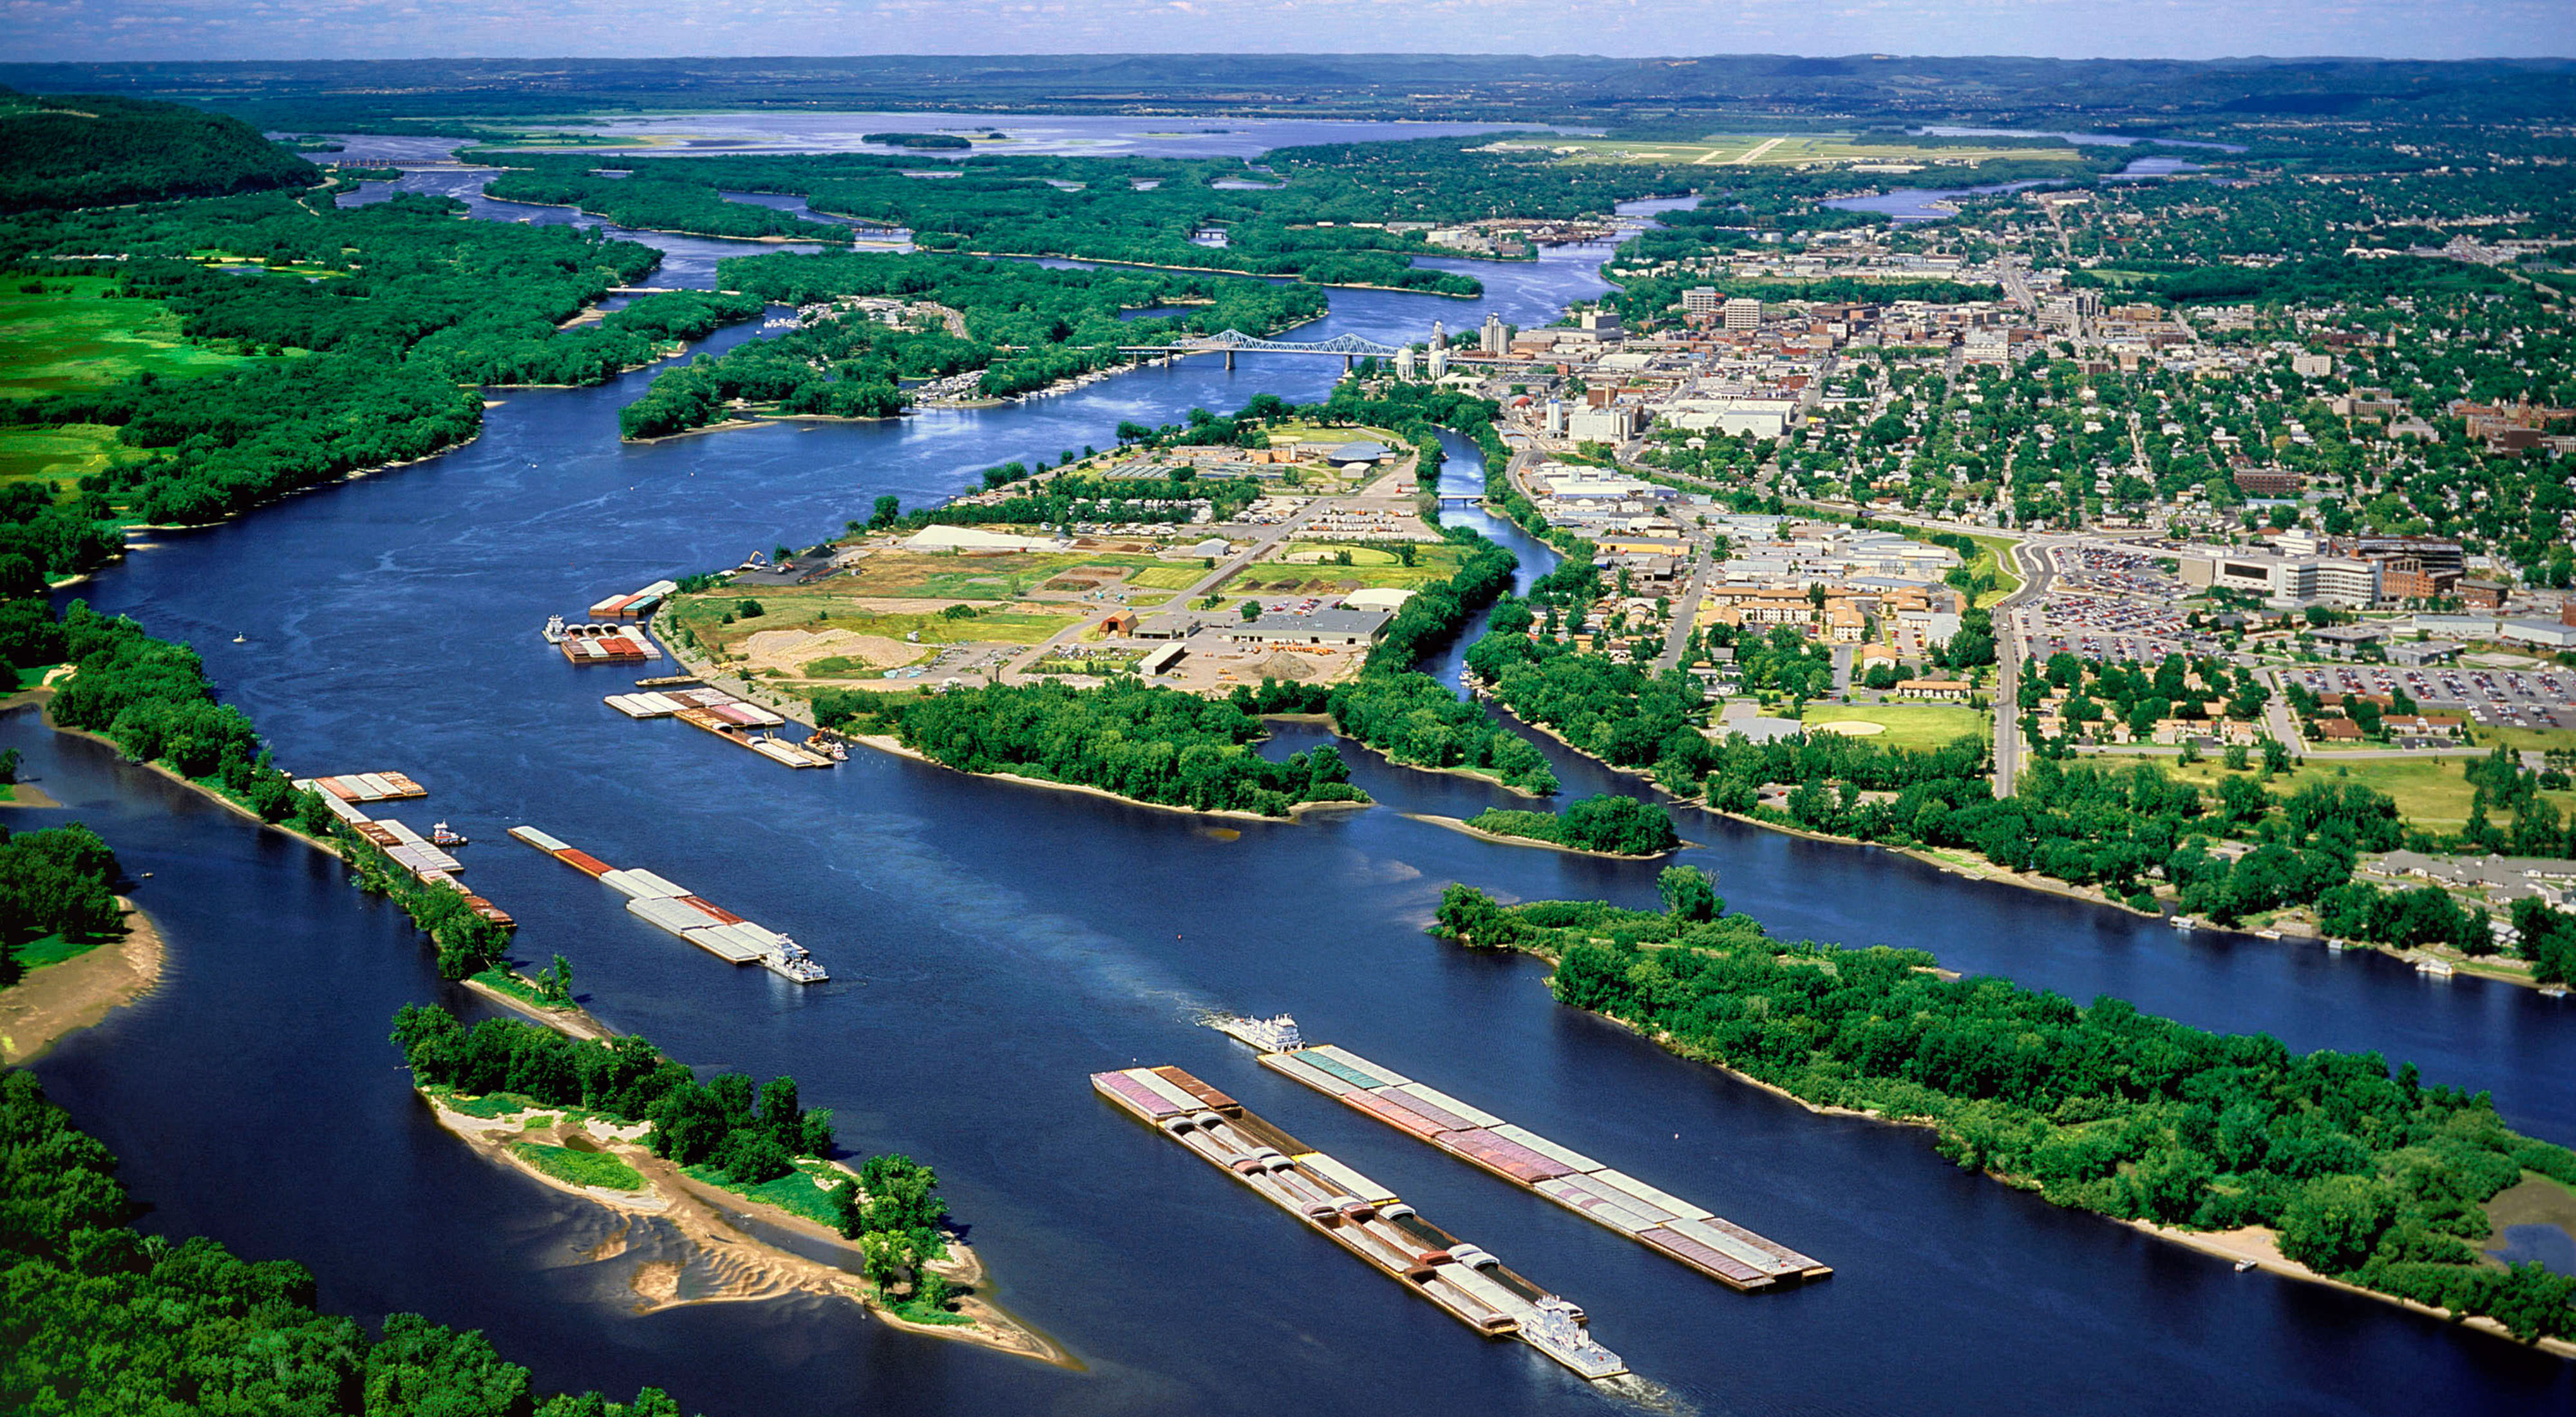 An aerial view of barges on the Mississippi river as it curves around populated and forested areas.